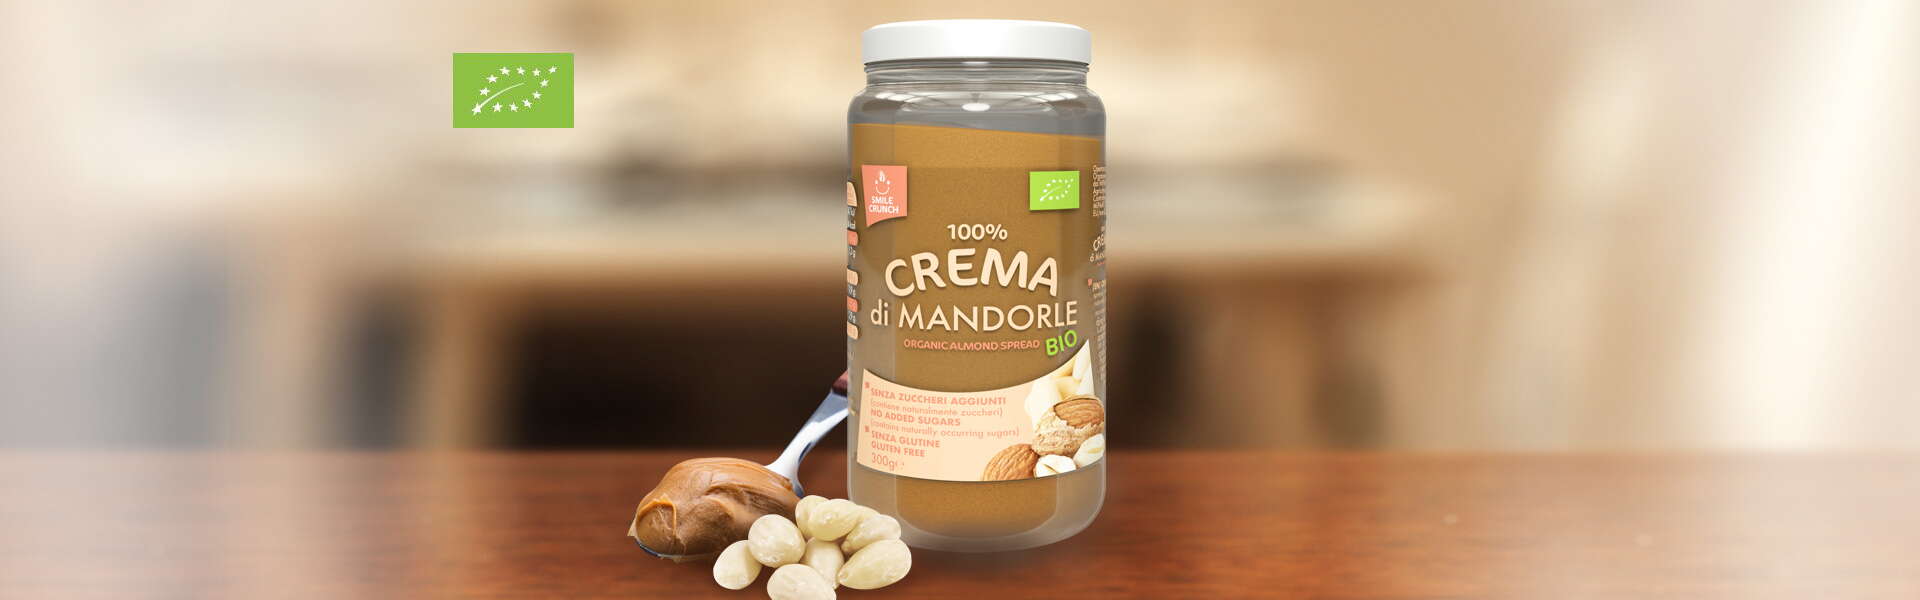 Why organic almond cream is the snack of the future